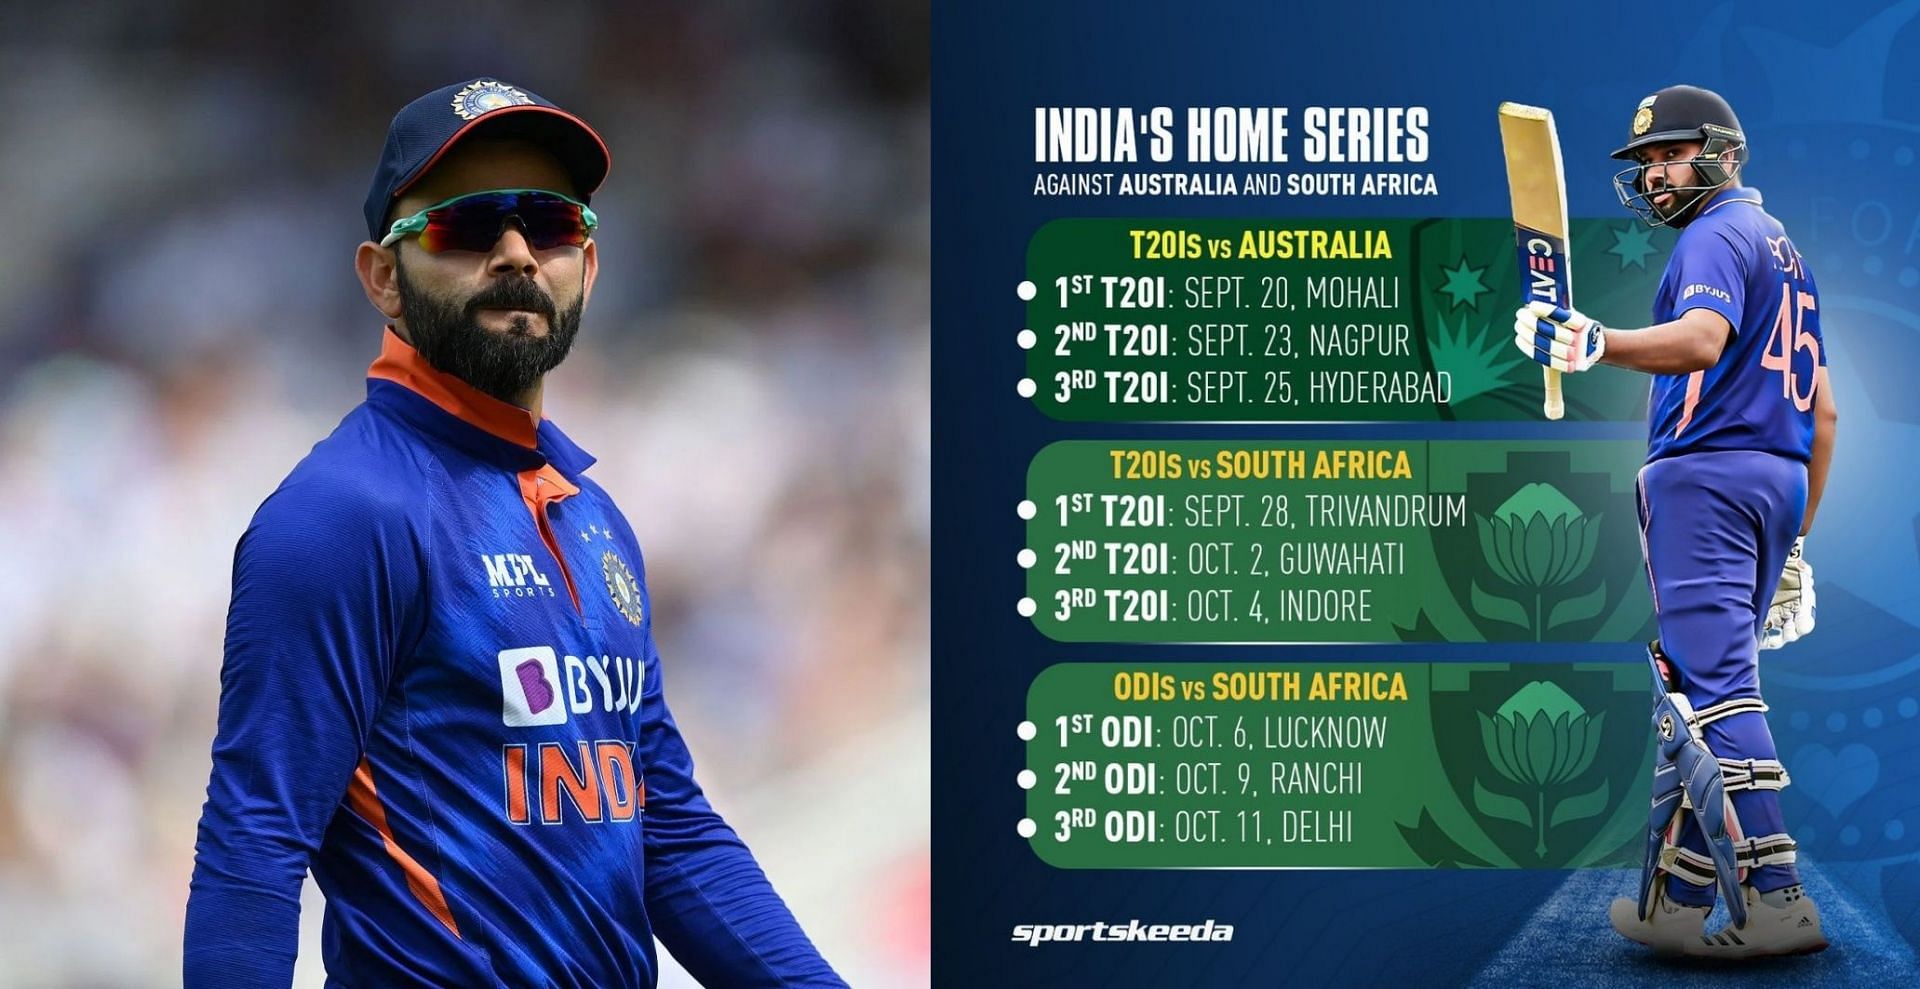 India have a number of matches lined up ahead of the T20 World Cup.